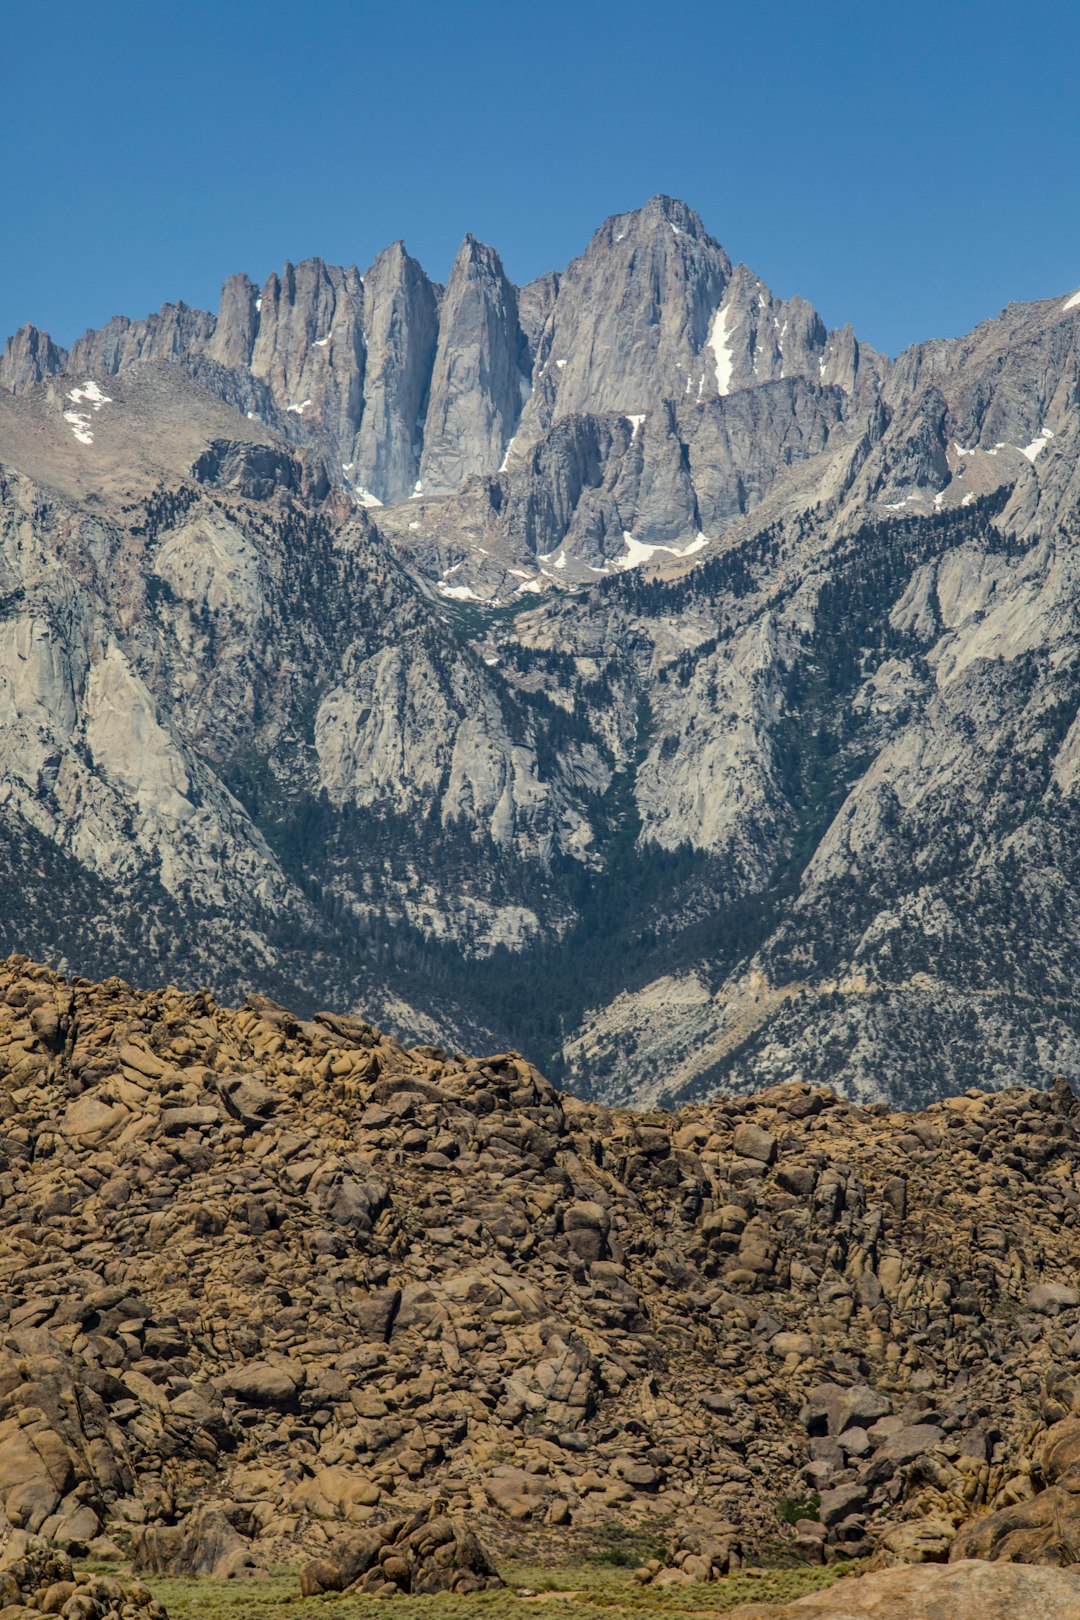 brown and gray rocky mountain under blue sky during daytime